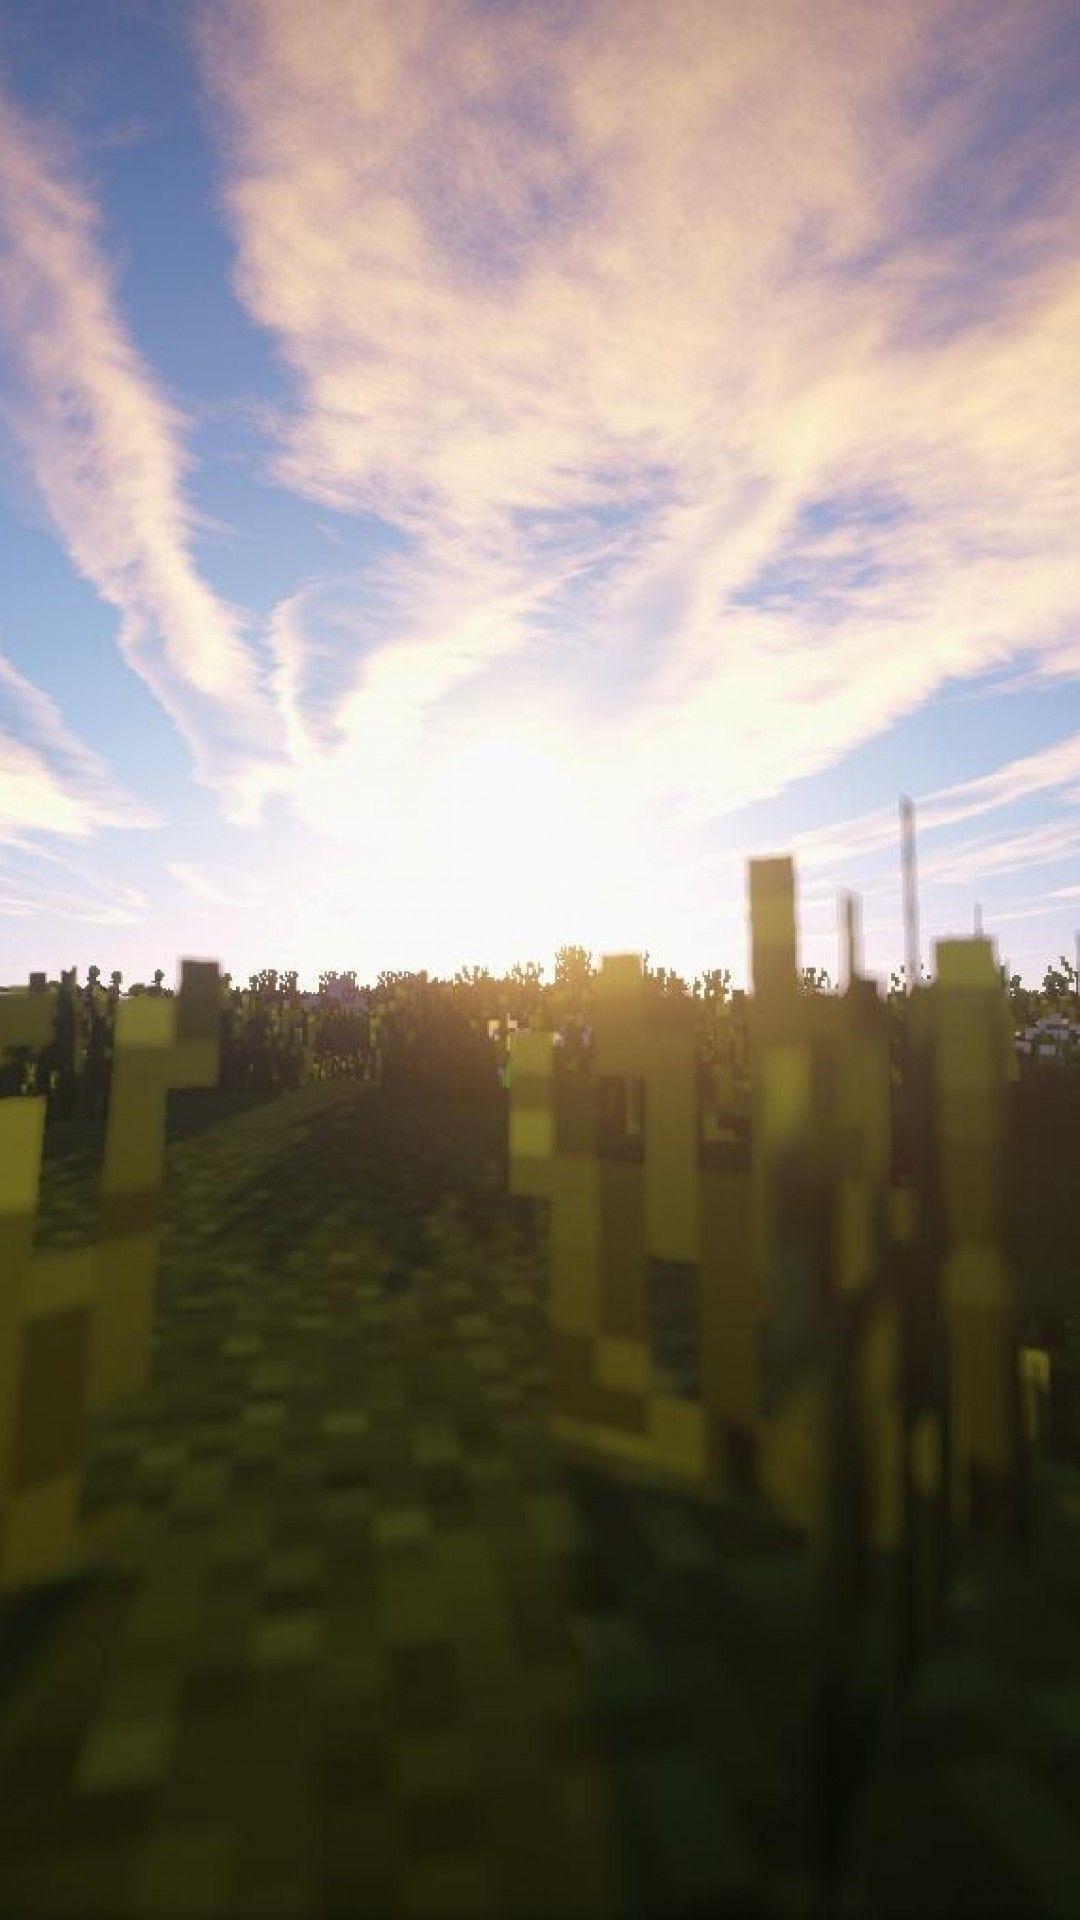 Minecraft Sunset Wallpapers Ntbeamng